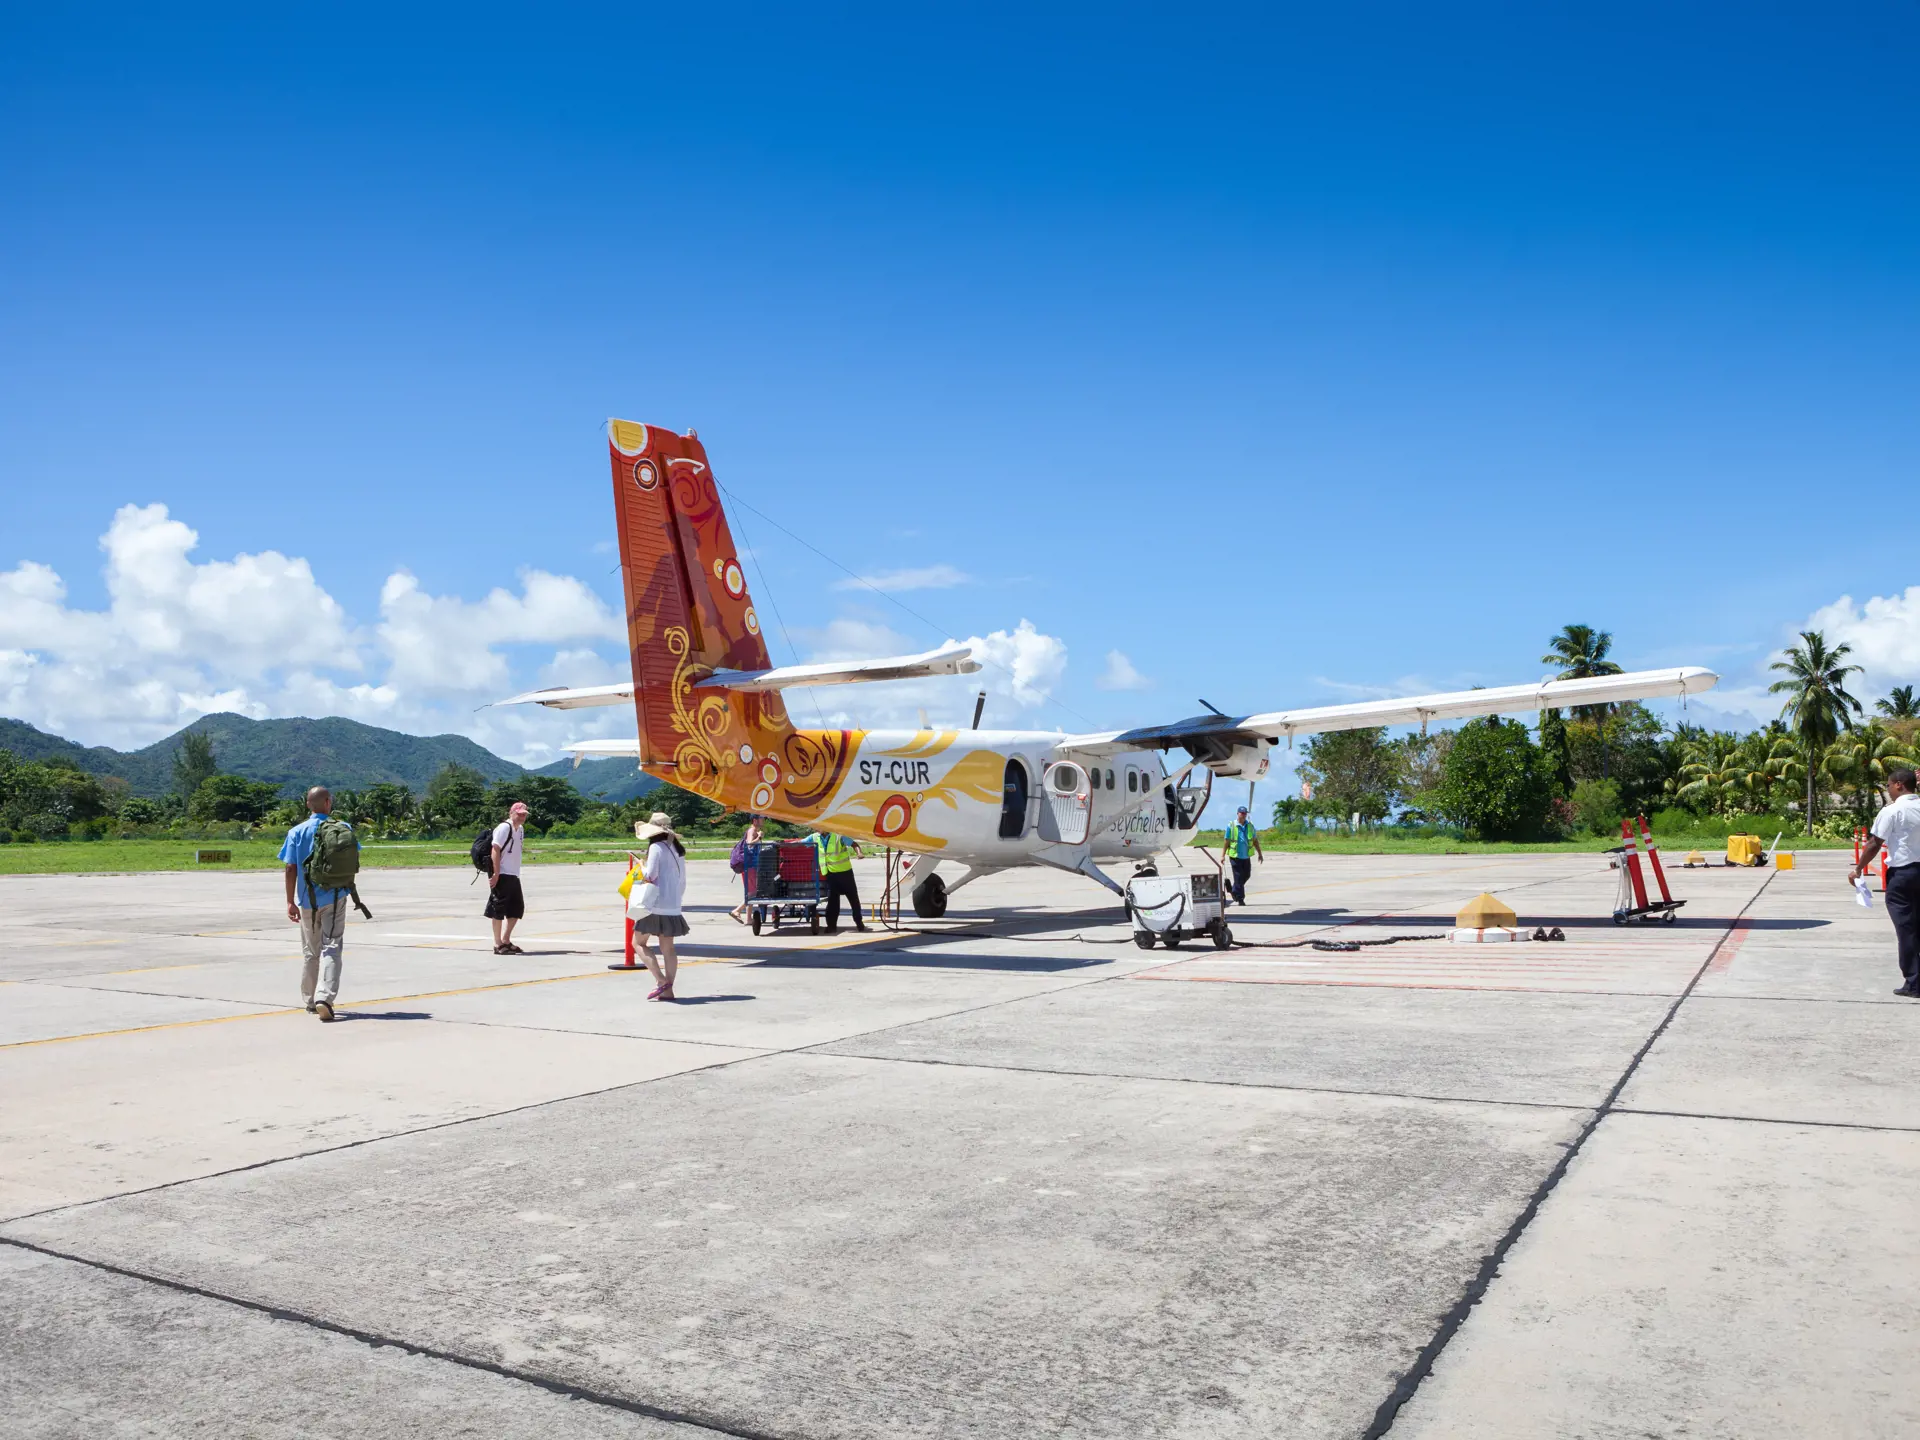 shutterstock_720707206 Praslin, Seychelles Passengers at the airport go on board the aircraft Air Seychelles, Praslin, Seychelles..jpg